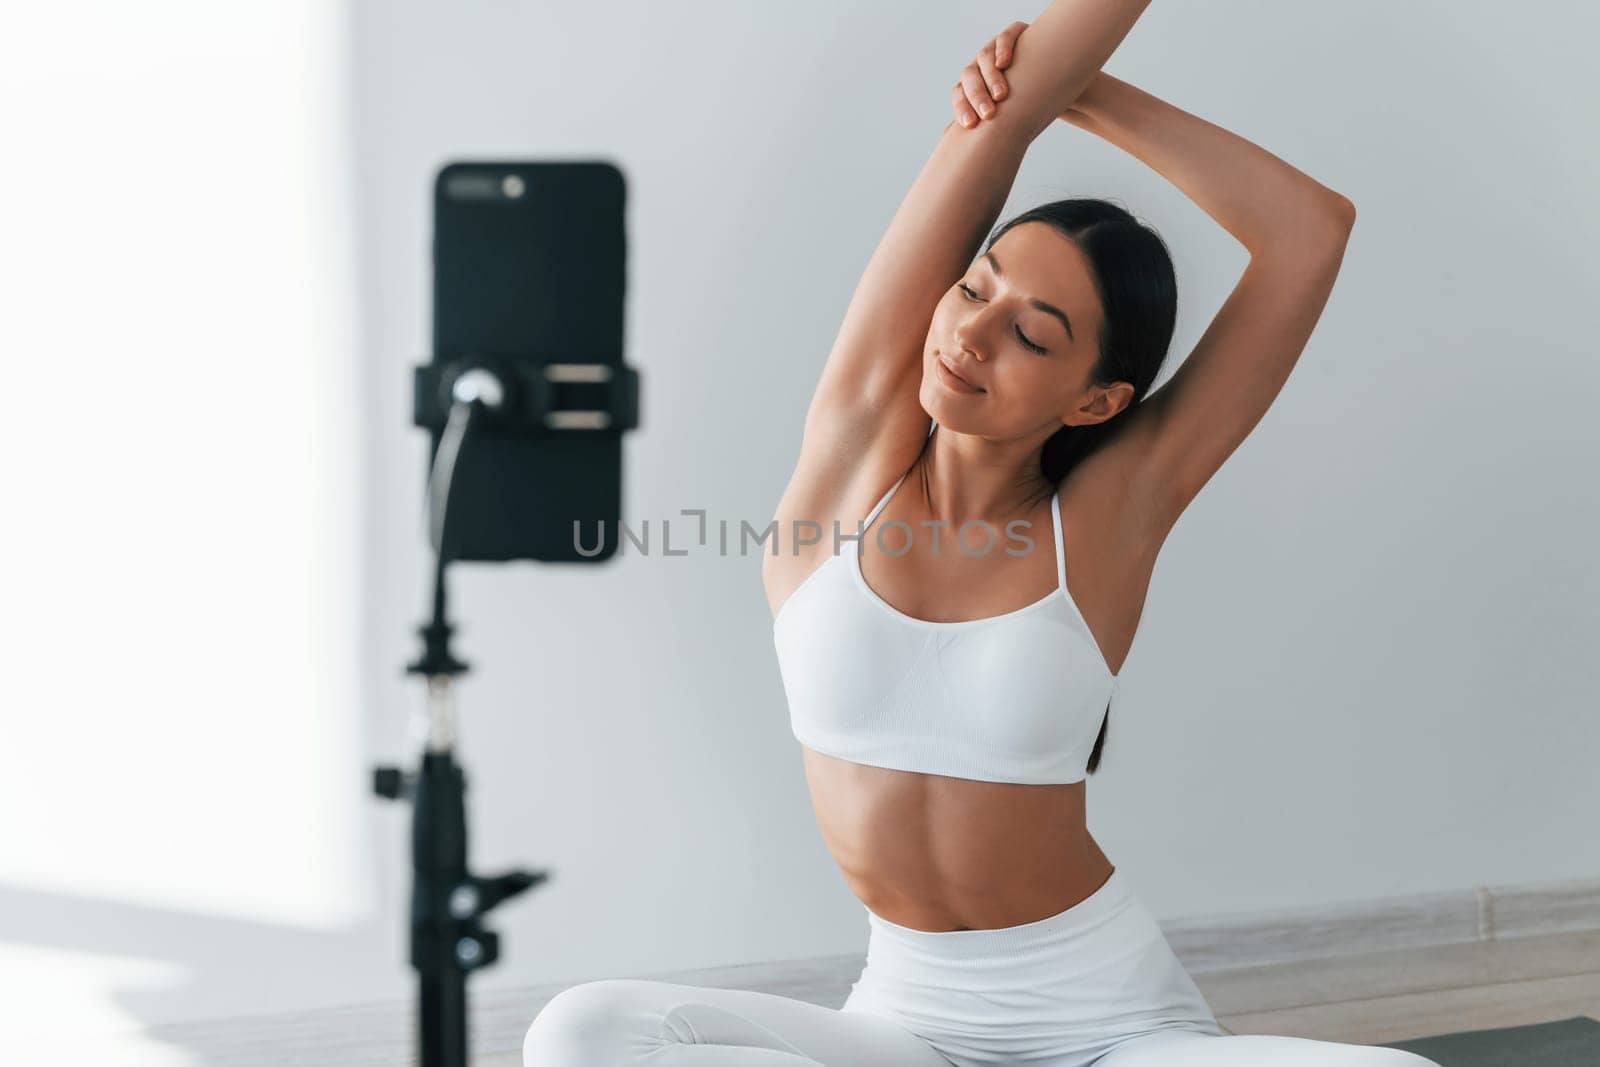 Phone on tripod. Young caucasian woman with slim body shape is indoors at daytime.